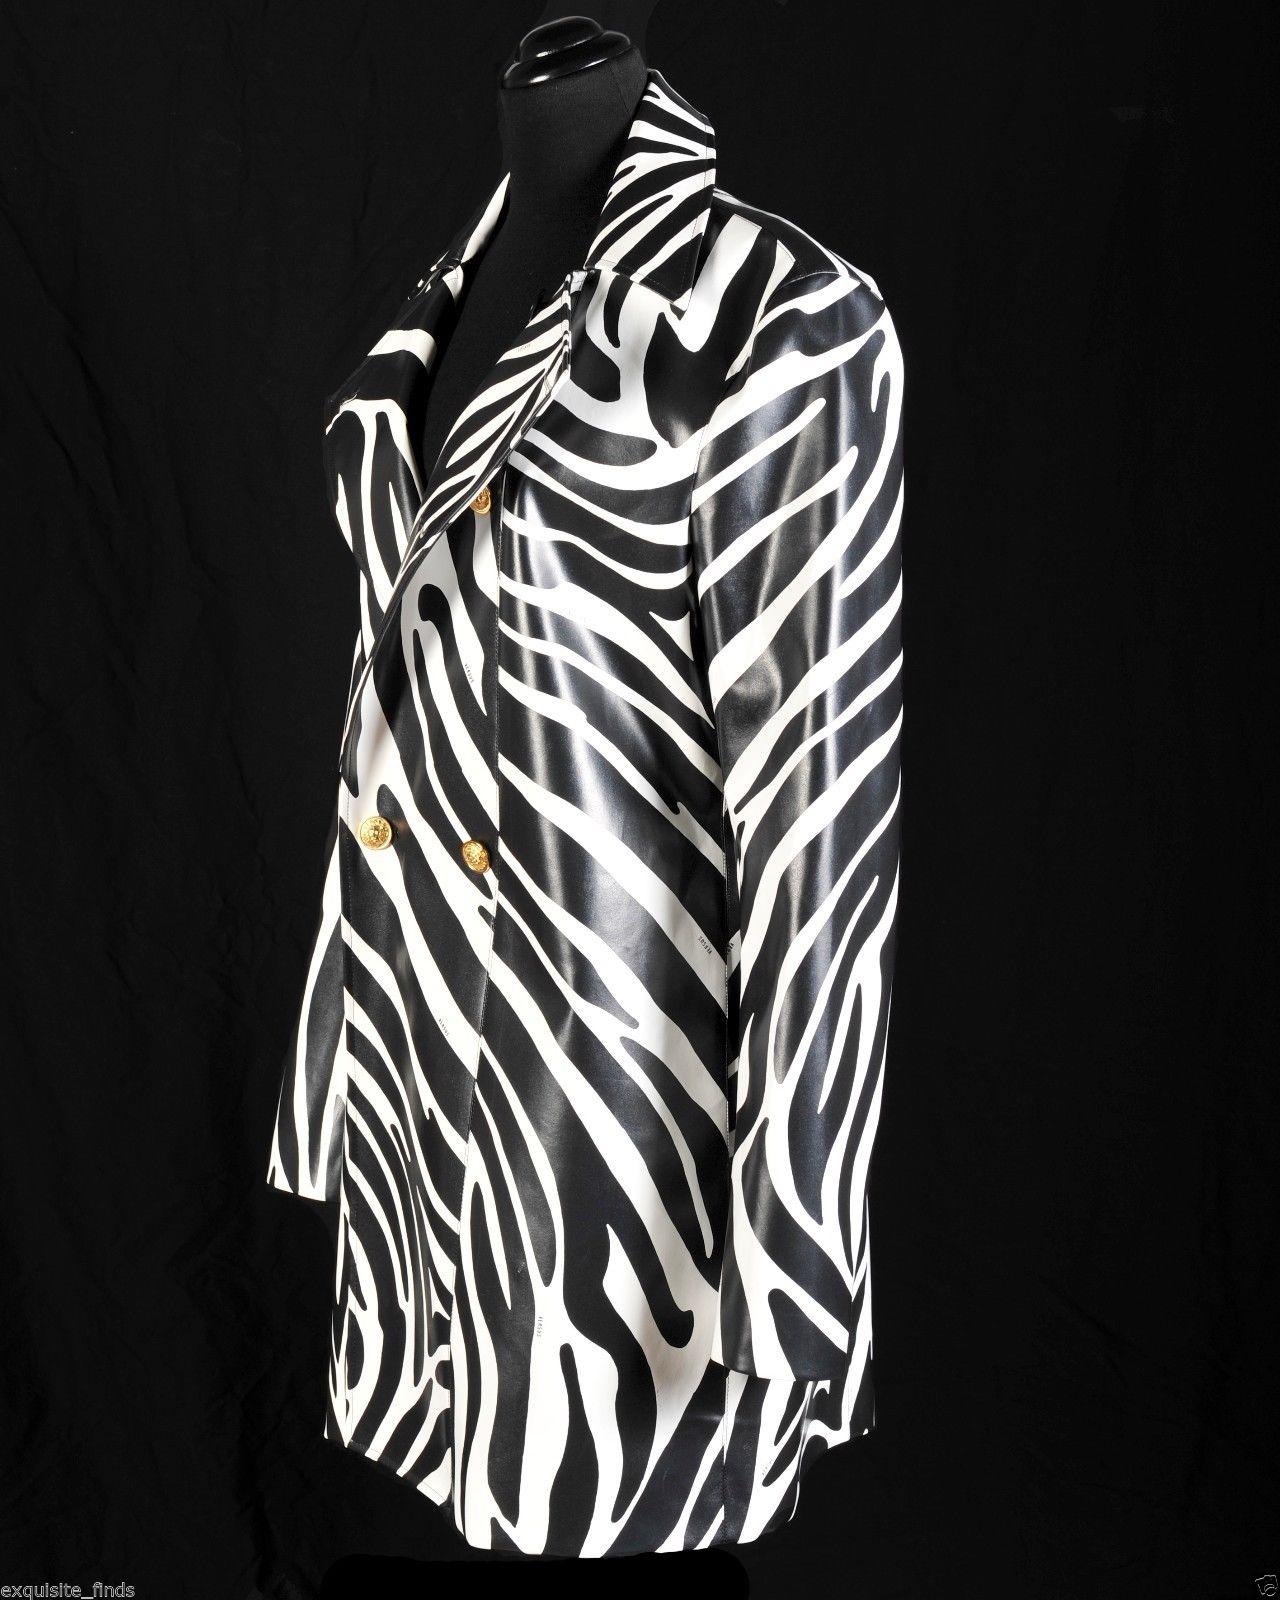 NEW VERSACE VERSUS MEN'S WATERPROOF ZEBRA PRINT COAT for MEN


With its waterproof finish and chic style, this gorgeous coat will add a panache to any wardrobe. 
Polyurethane coated polyester
Fully lined 
Finished with gold Lion buttons.
Italian